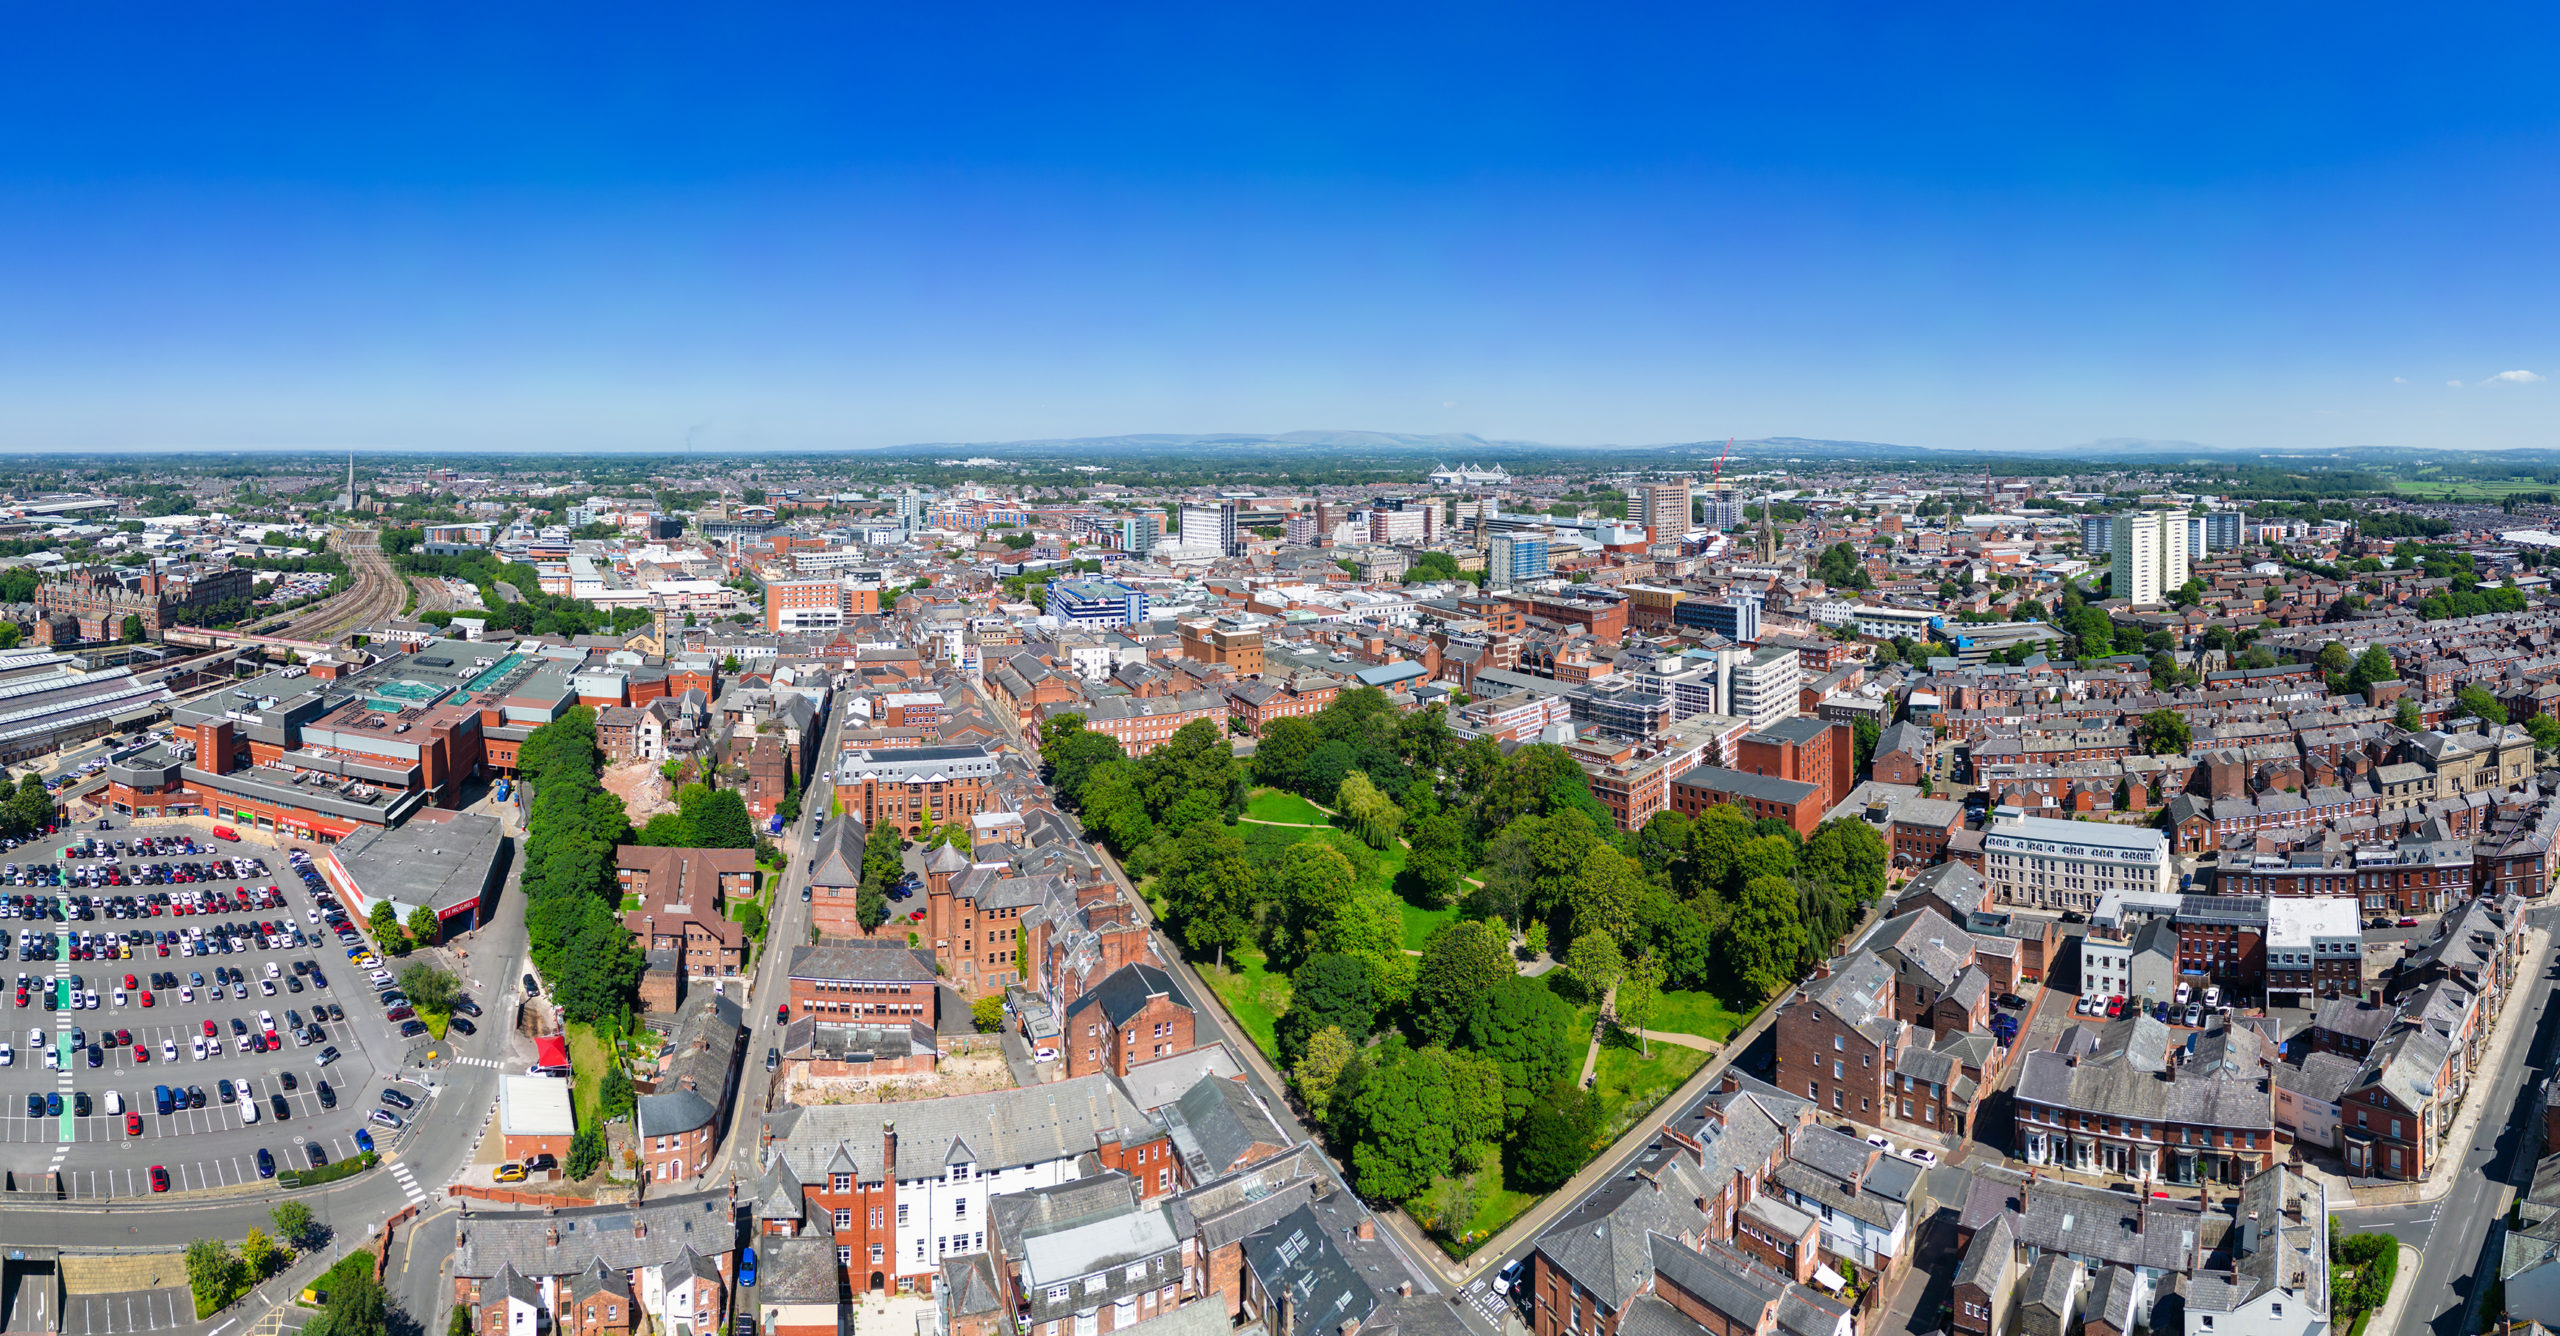 Preston from above showing the skyline